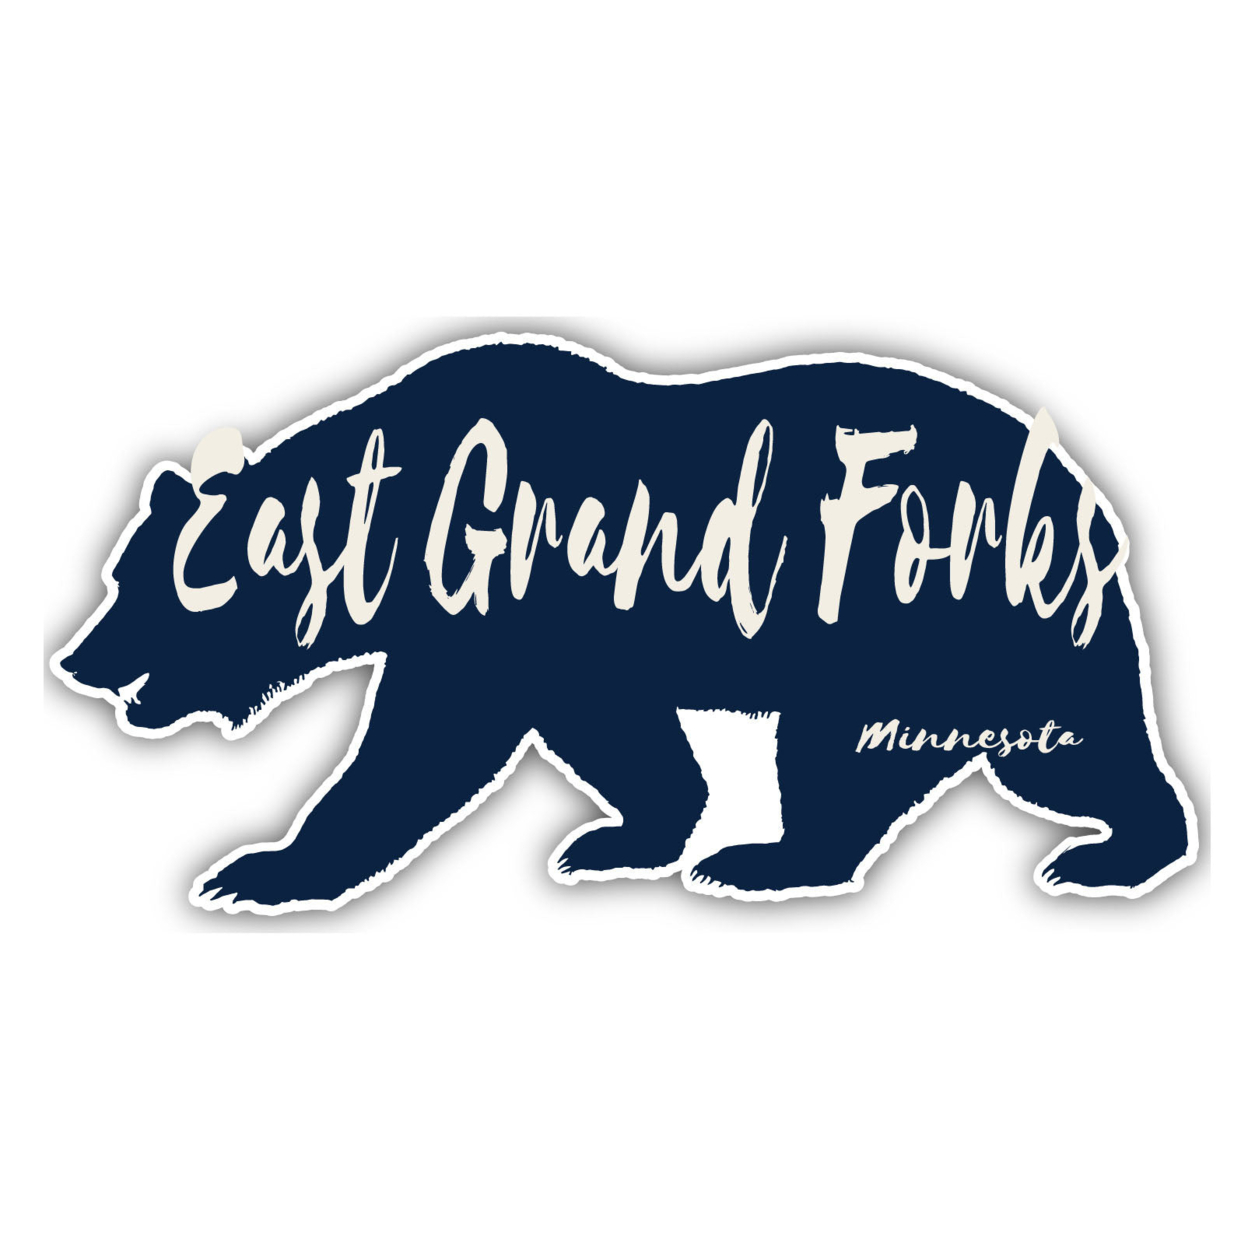 East Grand Forks Minnesota Souvenir Decorative Stickers (Choose Theme And Size) - Single Unit, 6-Inch, Camp Life